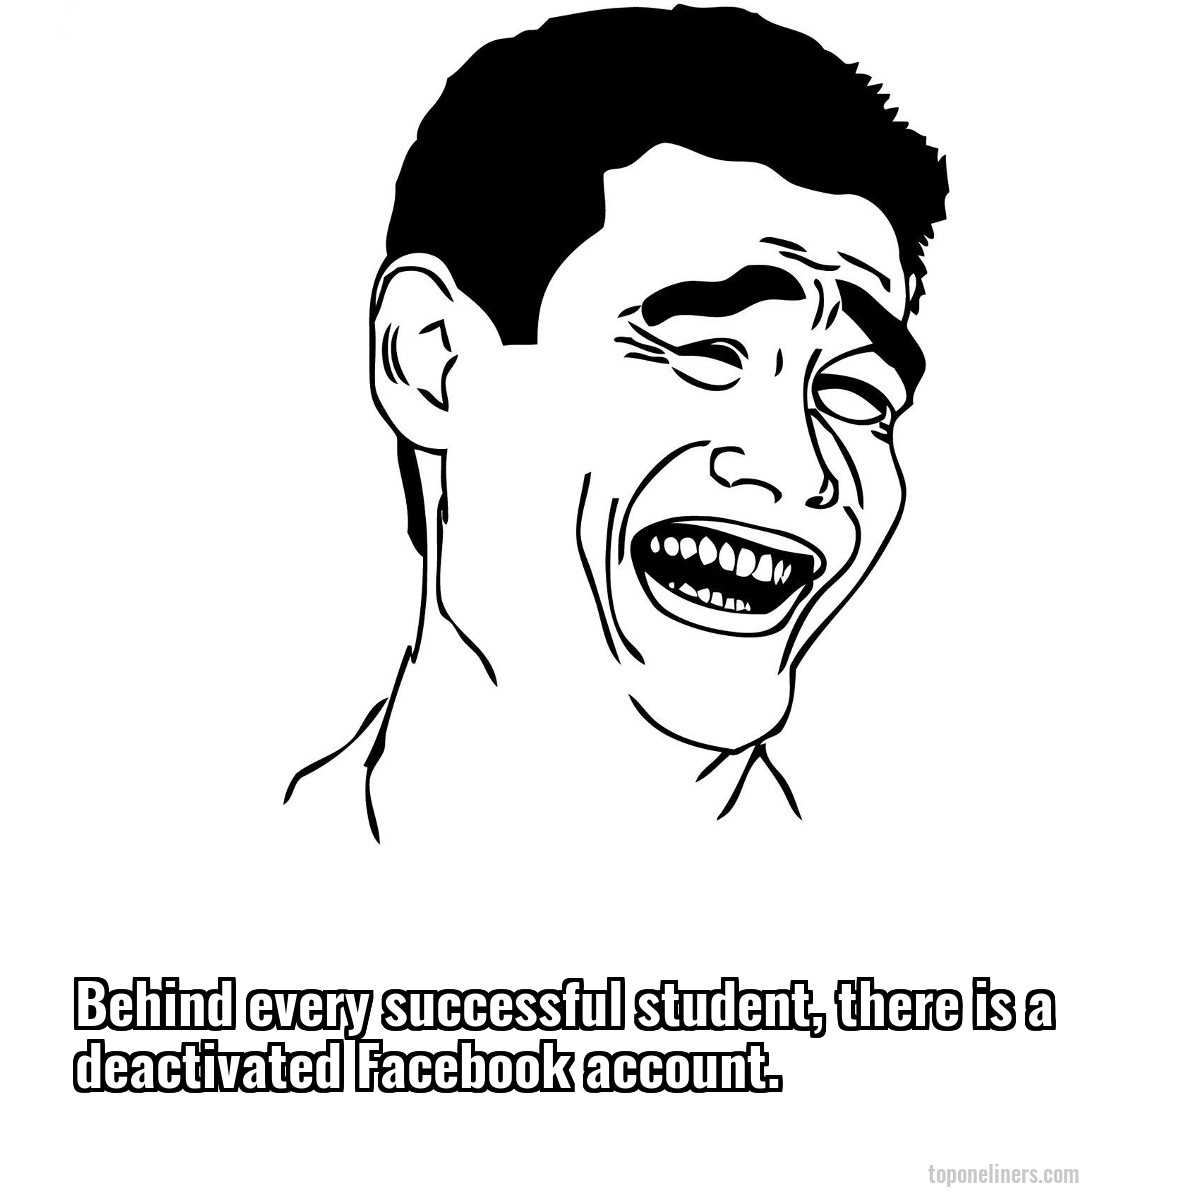 Behind every successful student, there is a deactivated Facebook account.
